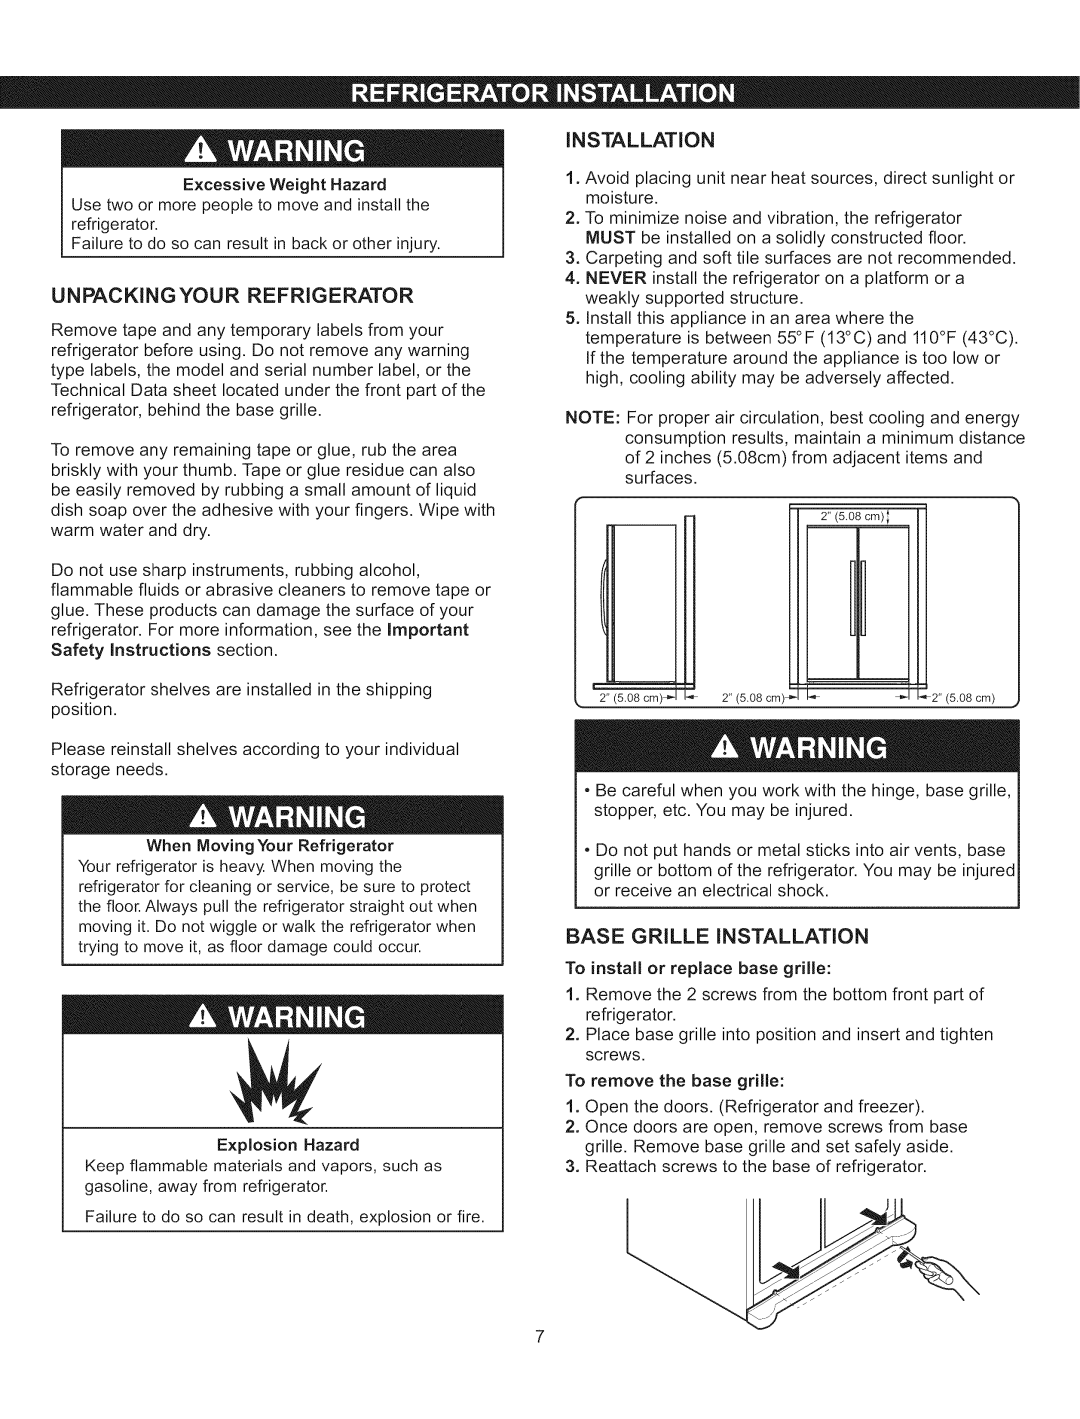 Kenmore 795.5108, 795.5107 manual Unpacking Your Refrigerator, Base Grille Installation 